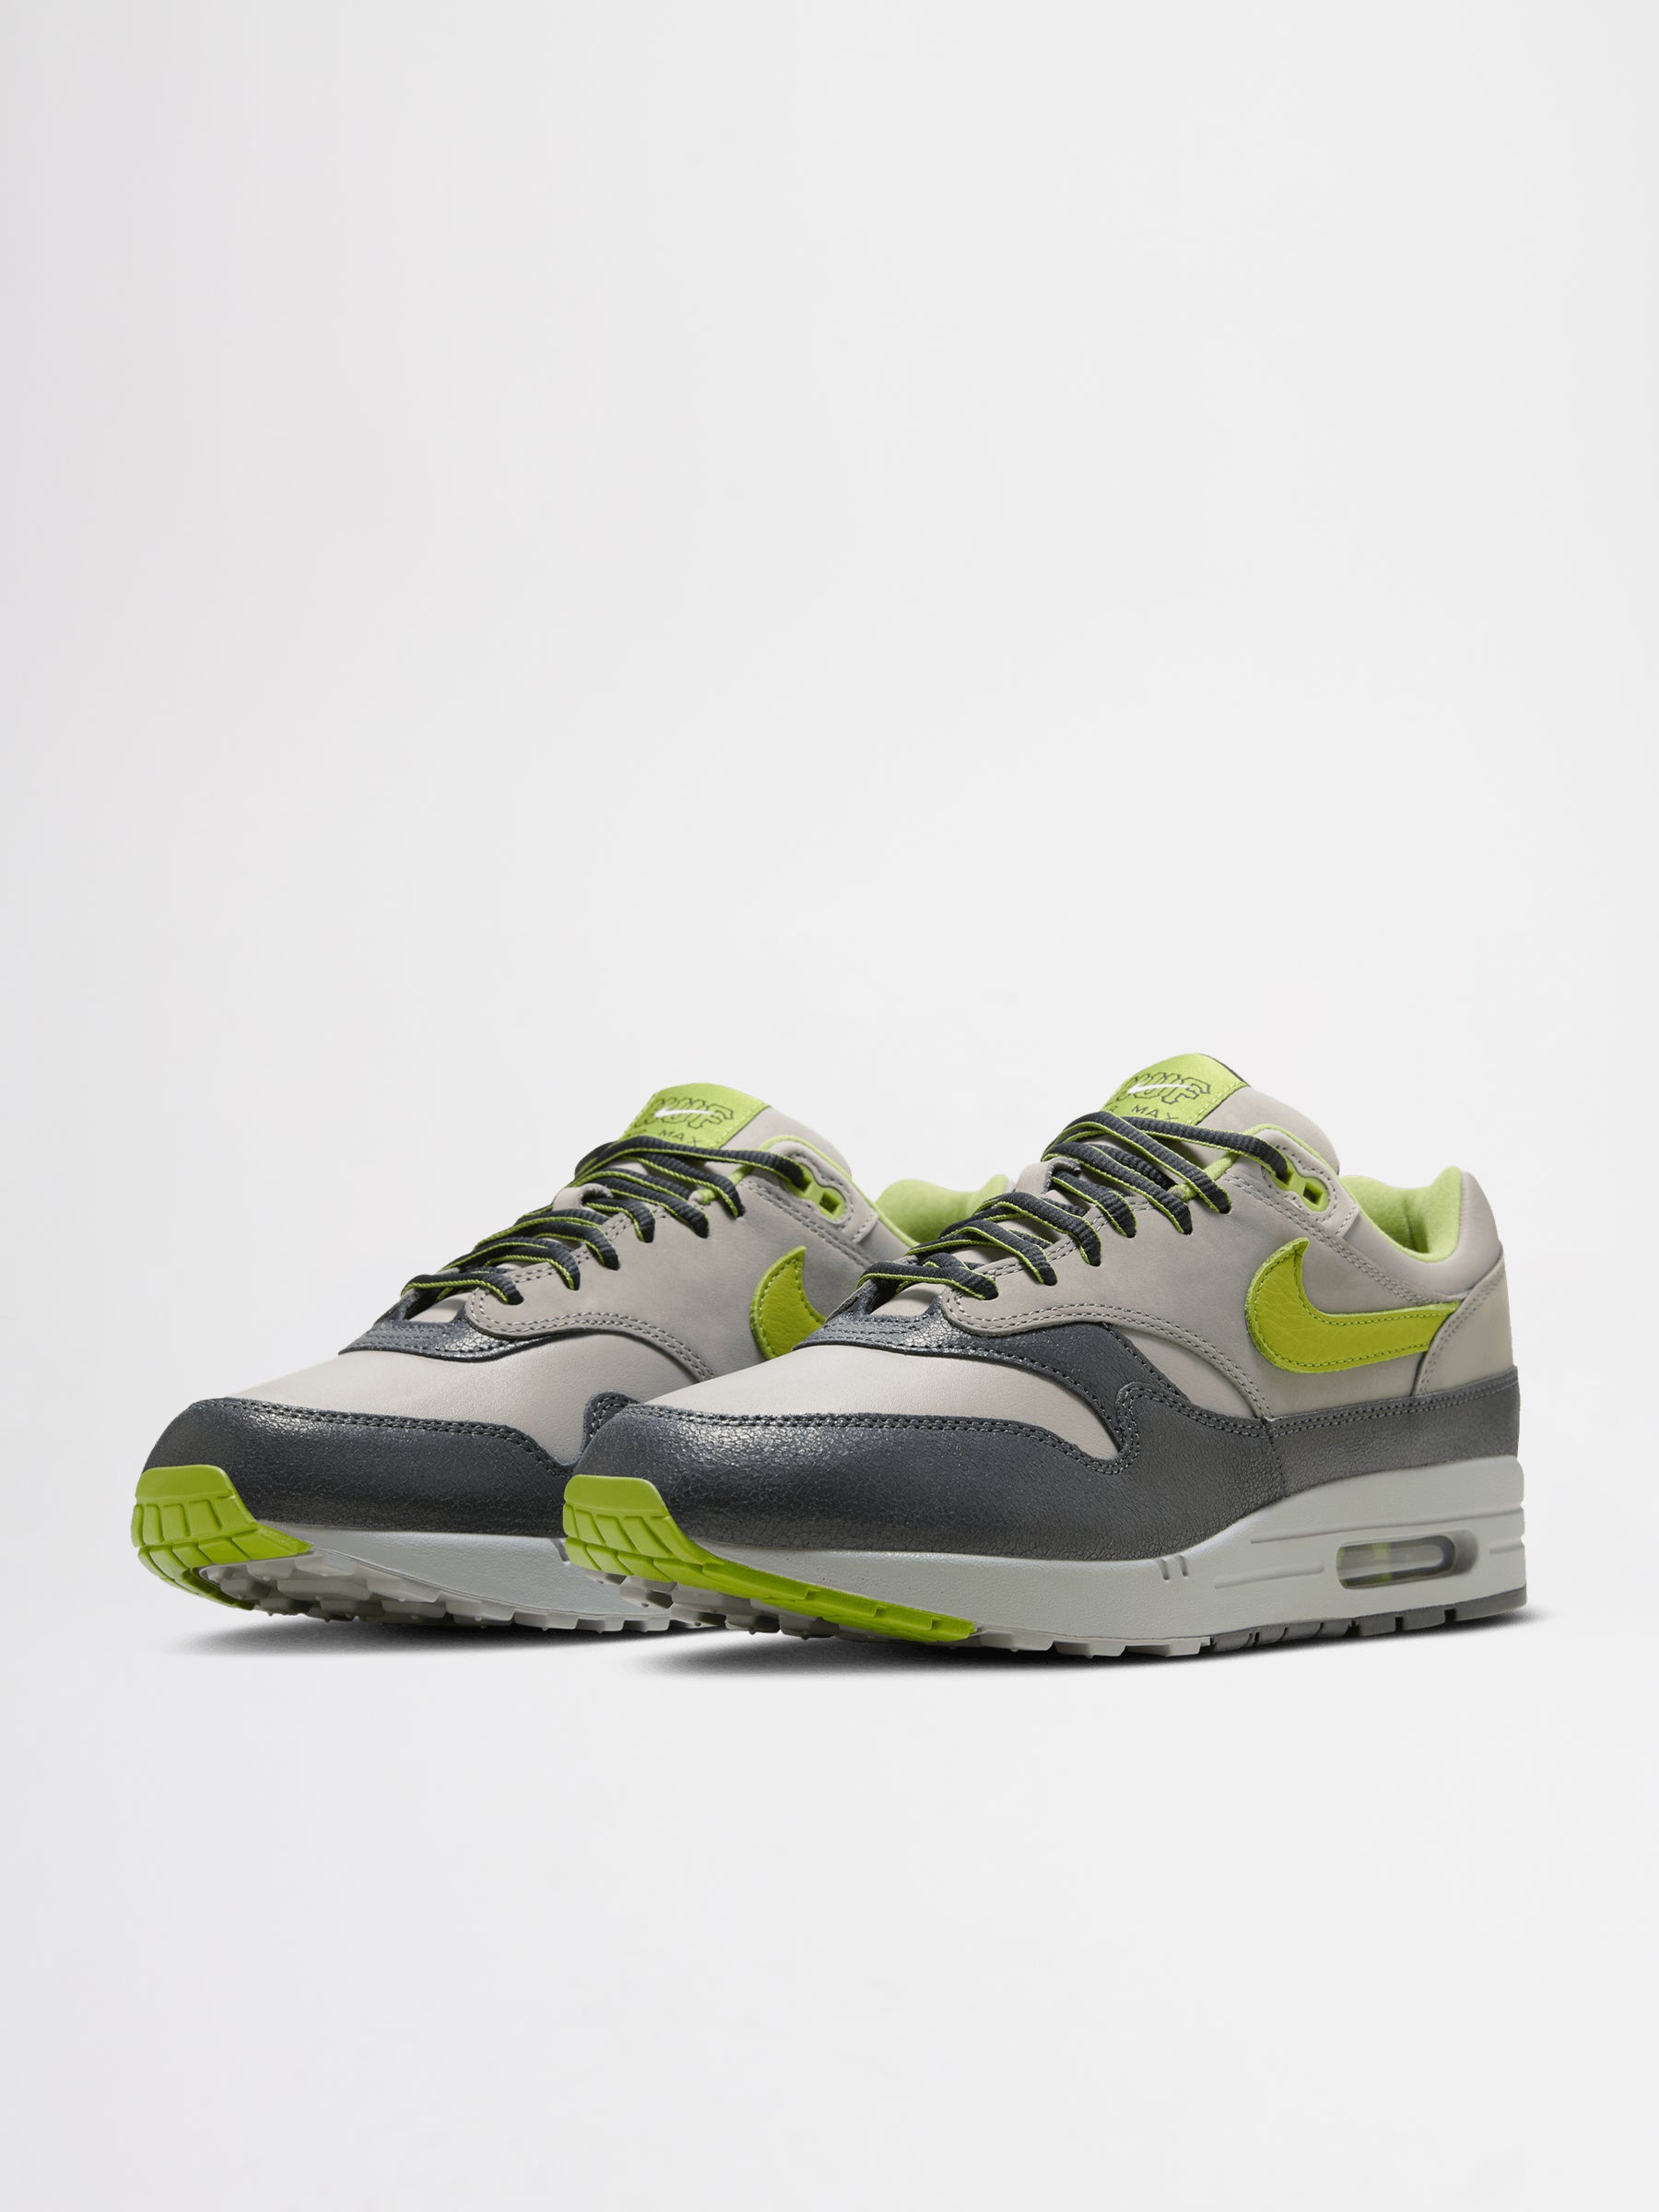 Nike x HUF Air Max 1 SP Anthracite / Pear